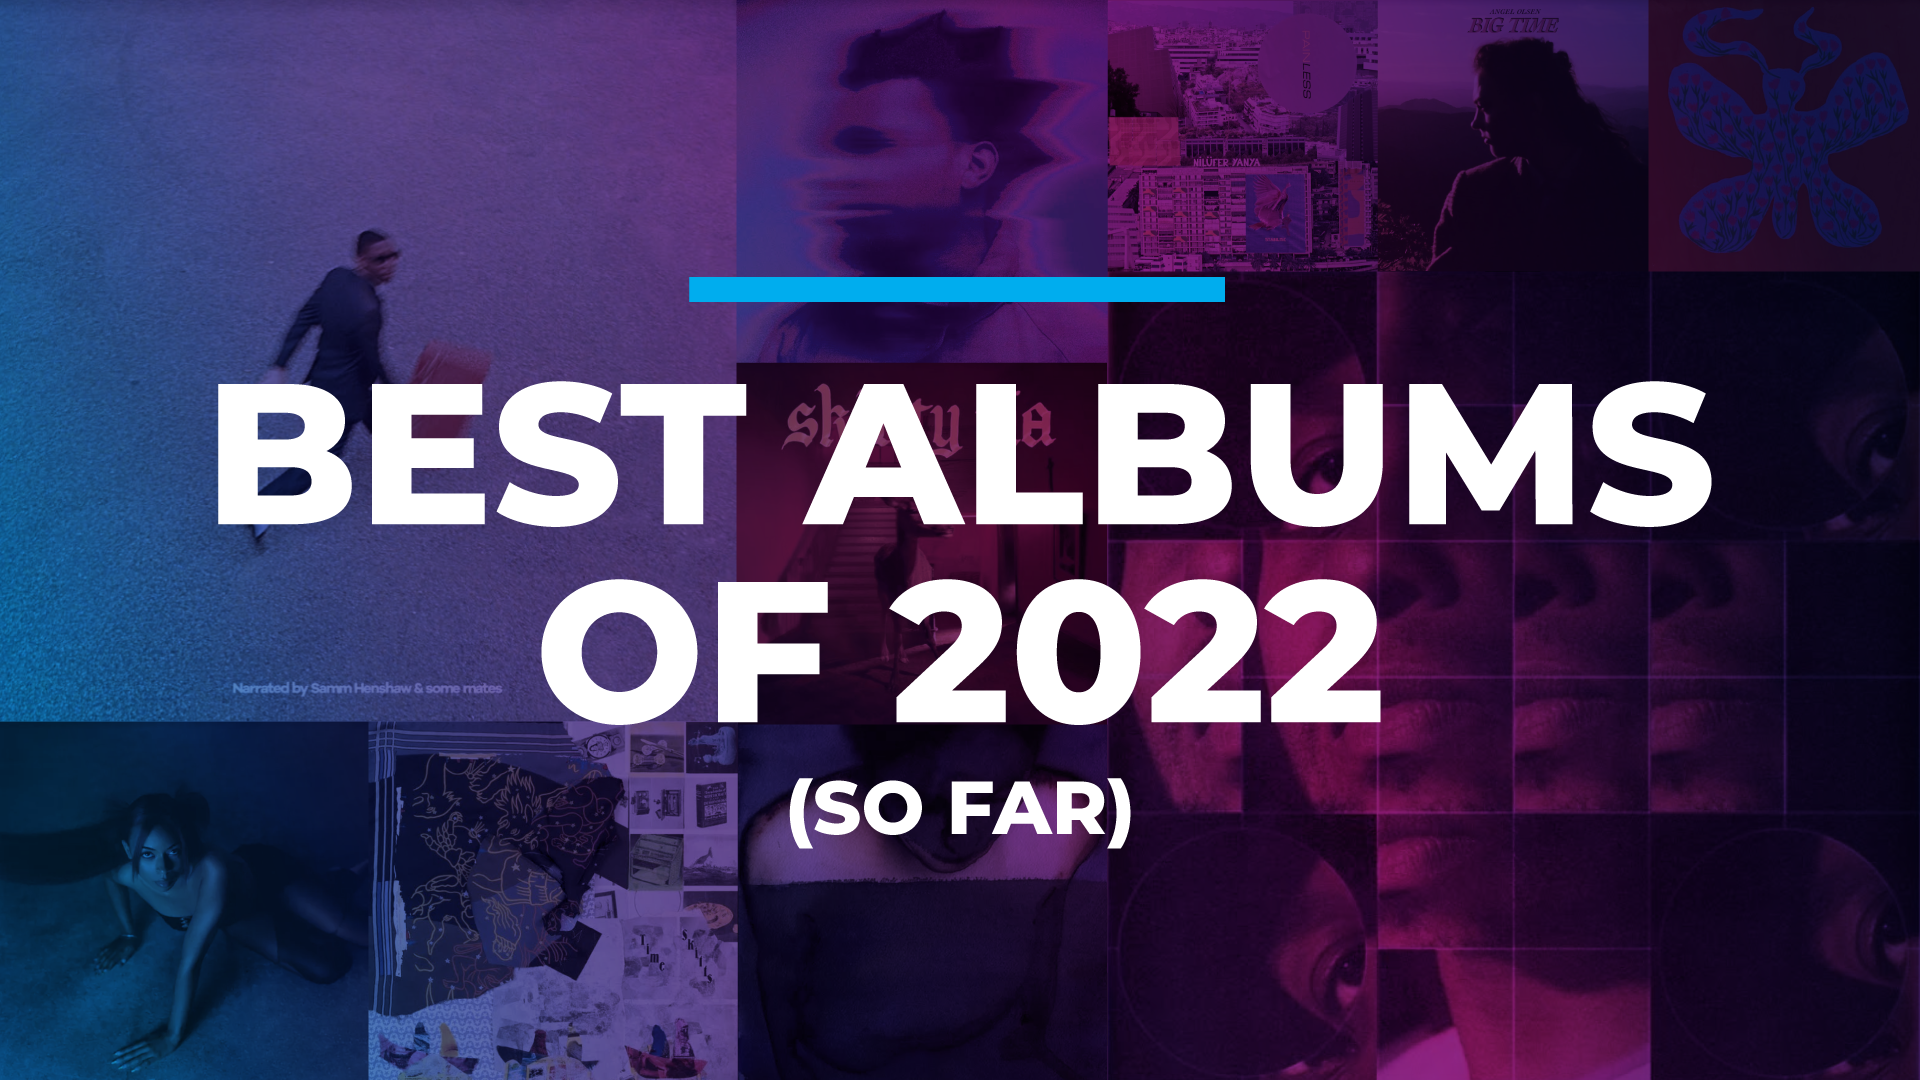 Featured image for “The 22 Best Albums of 2022 So Far”